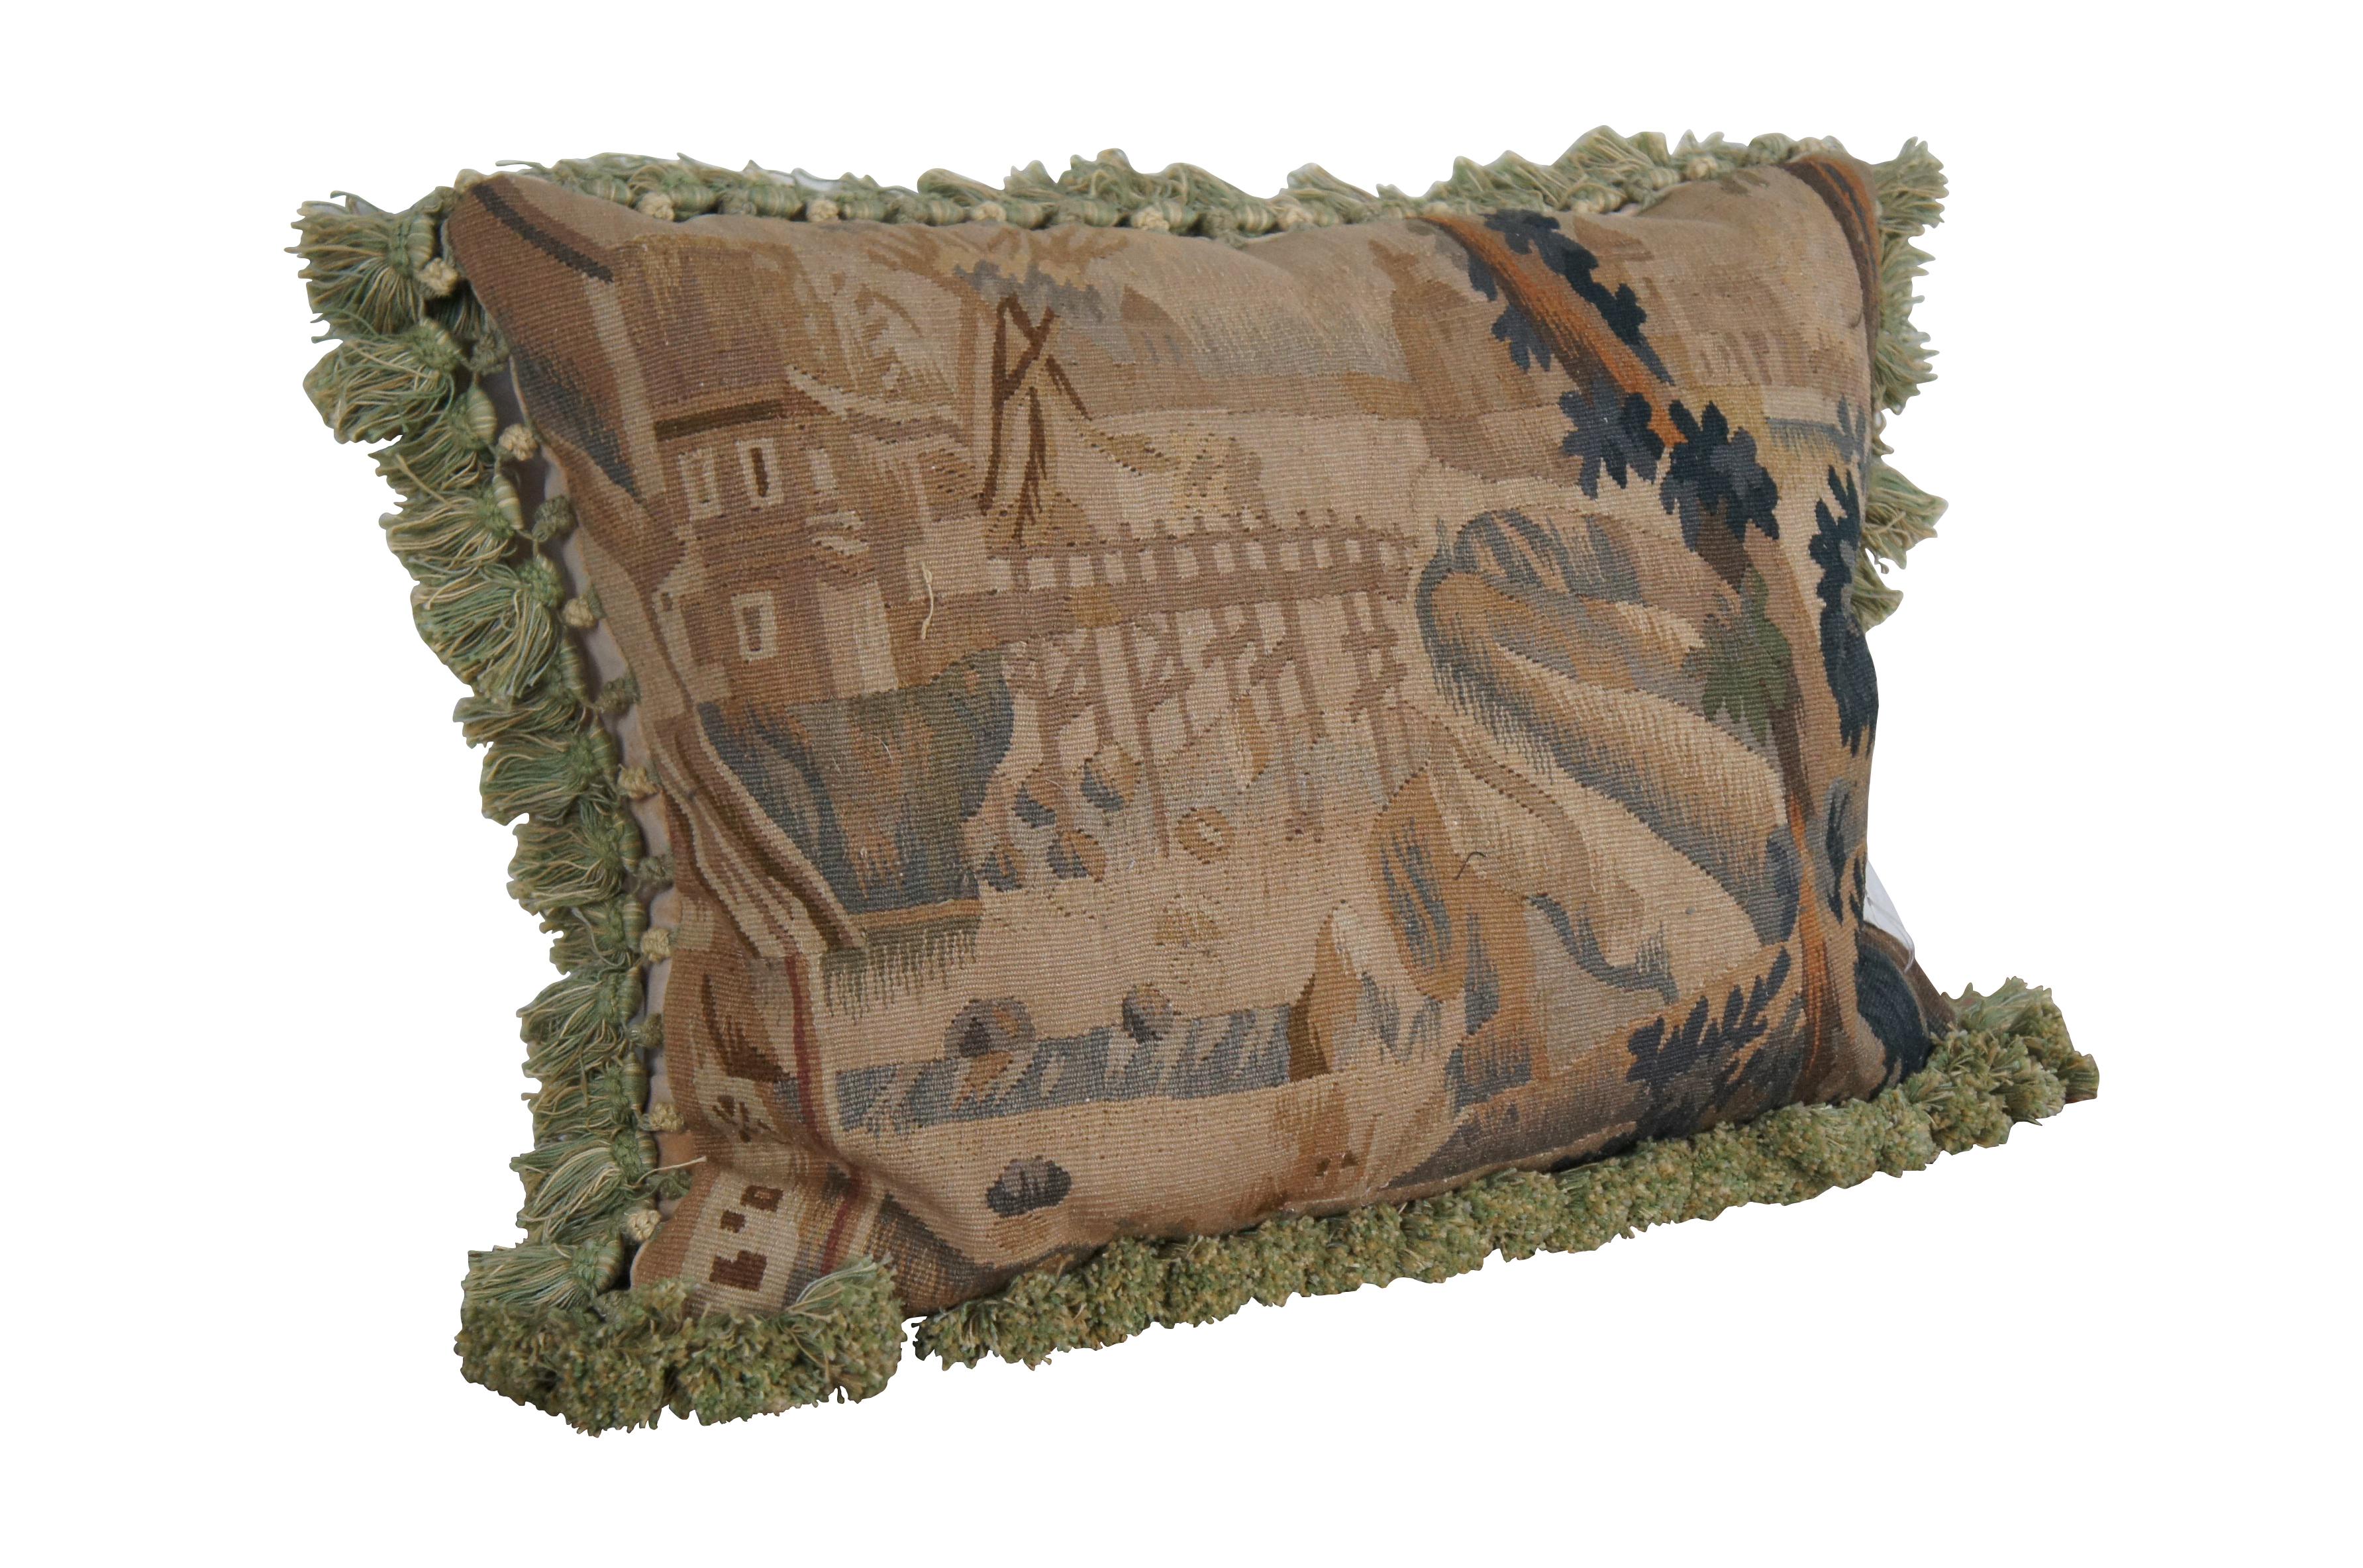 3 Available - 20th century French Aubusson style square throw pillow, embroidered in wool showing a cityscape along a river, framed with rocks and trees. Cream and green tassel trim. Light brown velour back with zipper closure. Down